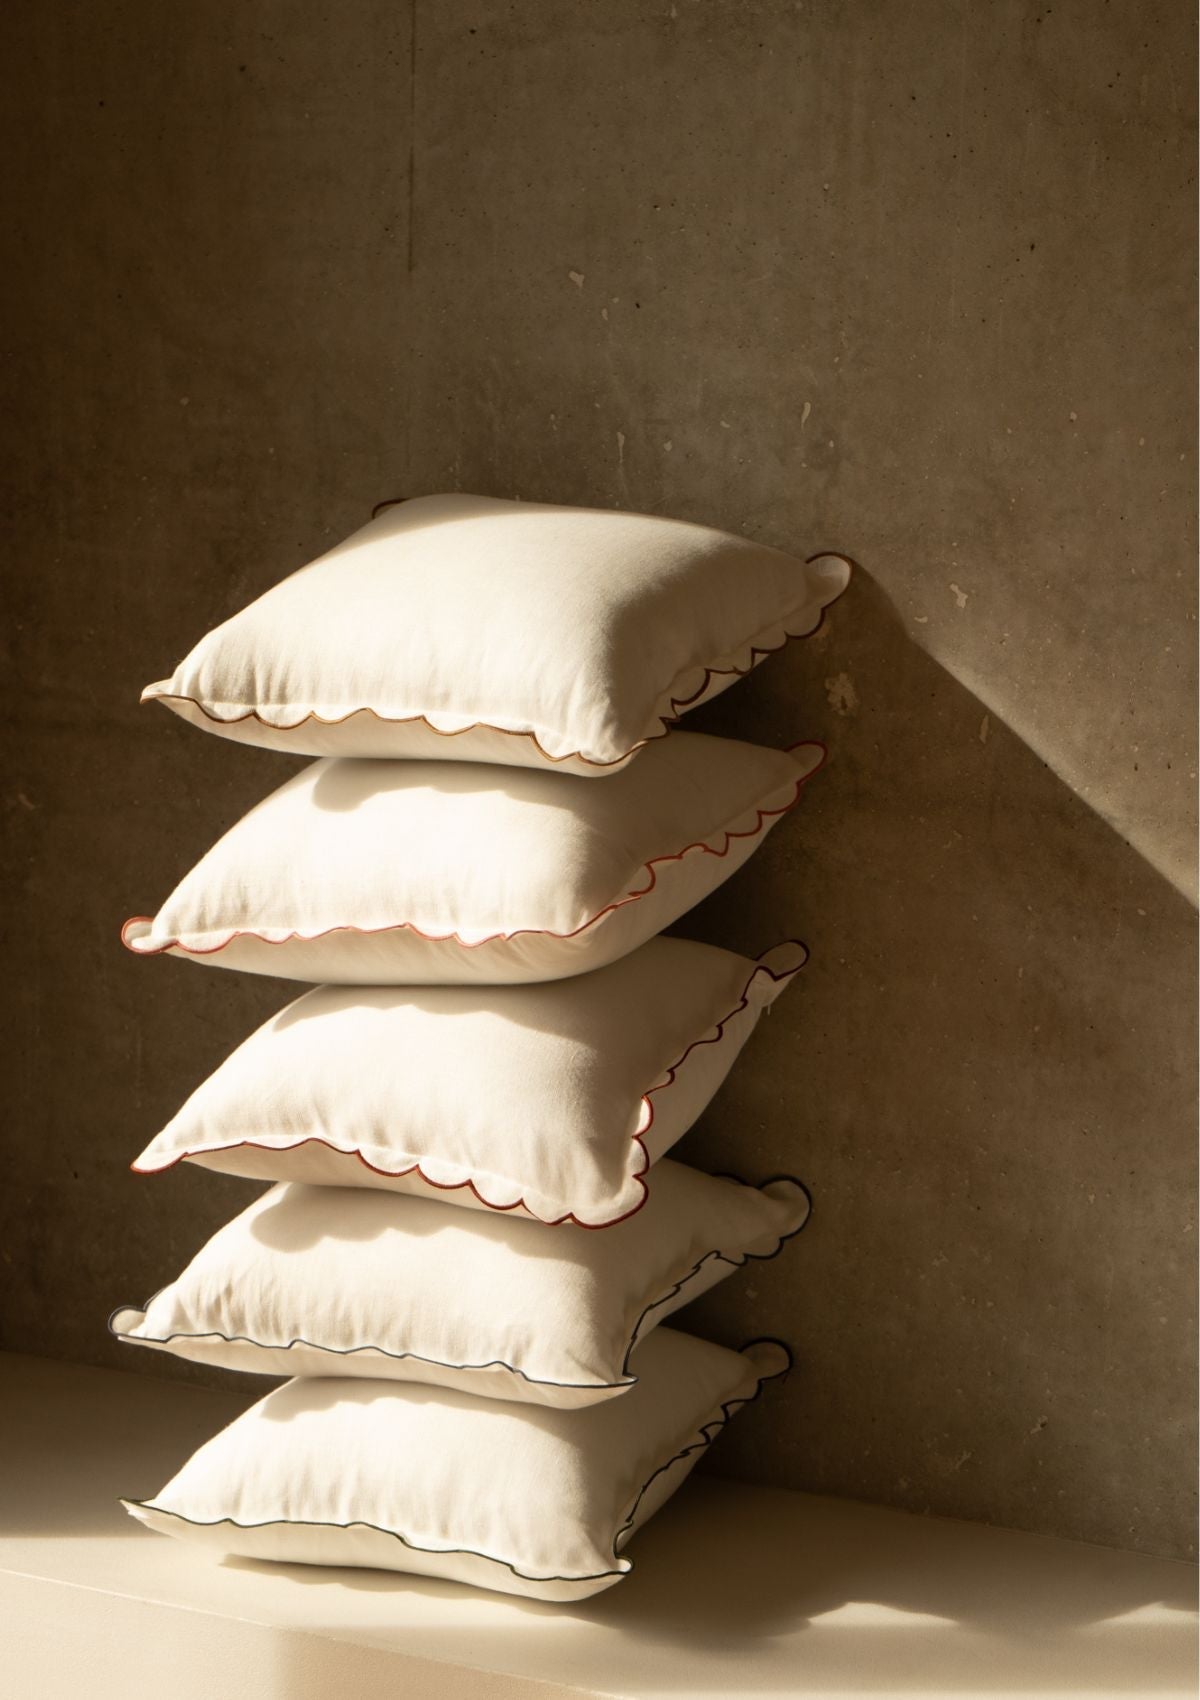 The square scalloped linen cushion in White & Yellow ocher